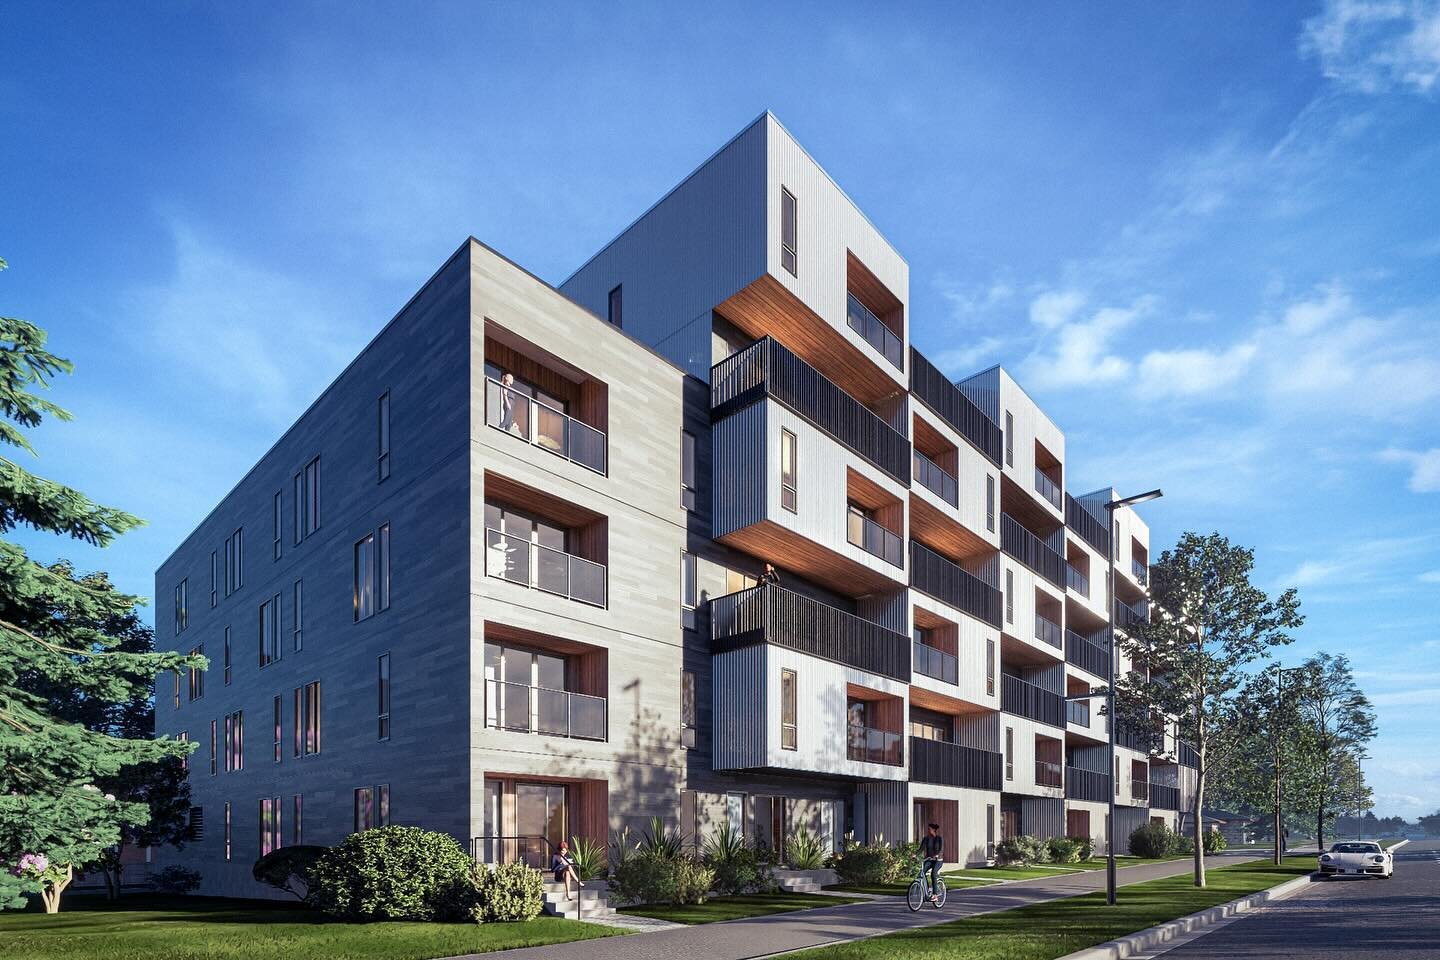 The community of Killarney is about to get 96 new homes in this stunning six-storey apartment building, whose DP was approved earlier this week. This purpose-built rental block will be the first of its kind along the recently upgraded Main Street of 